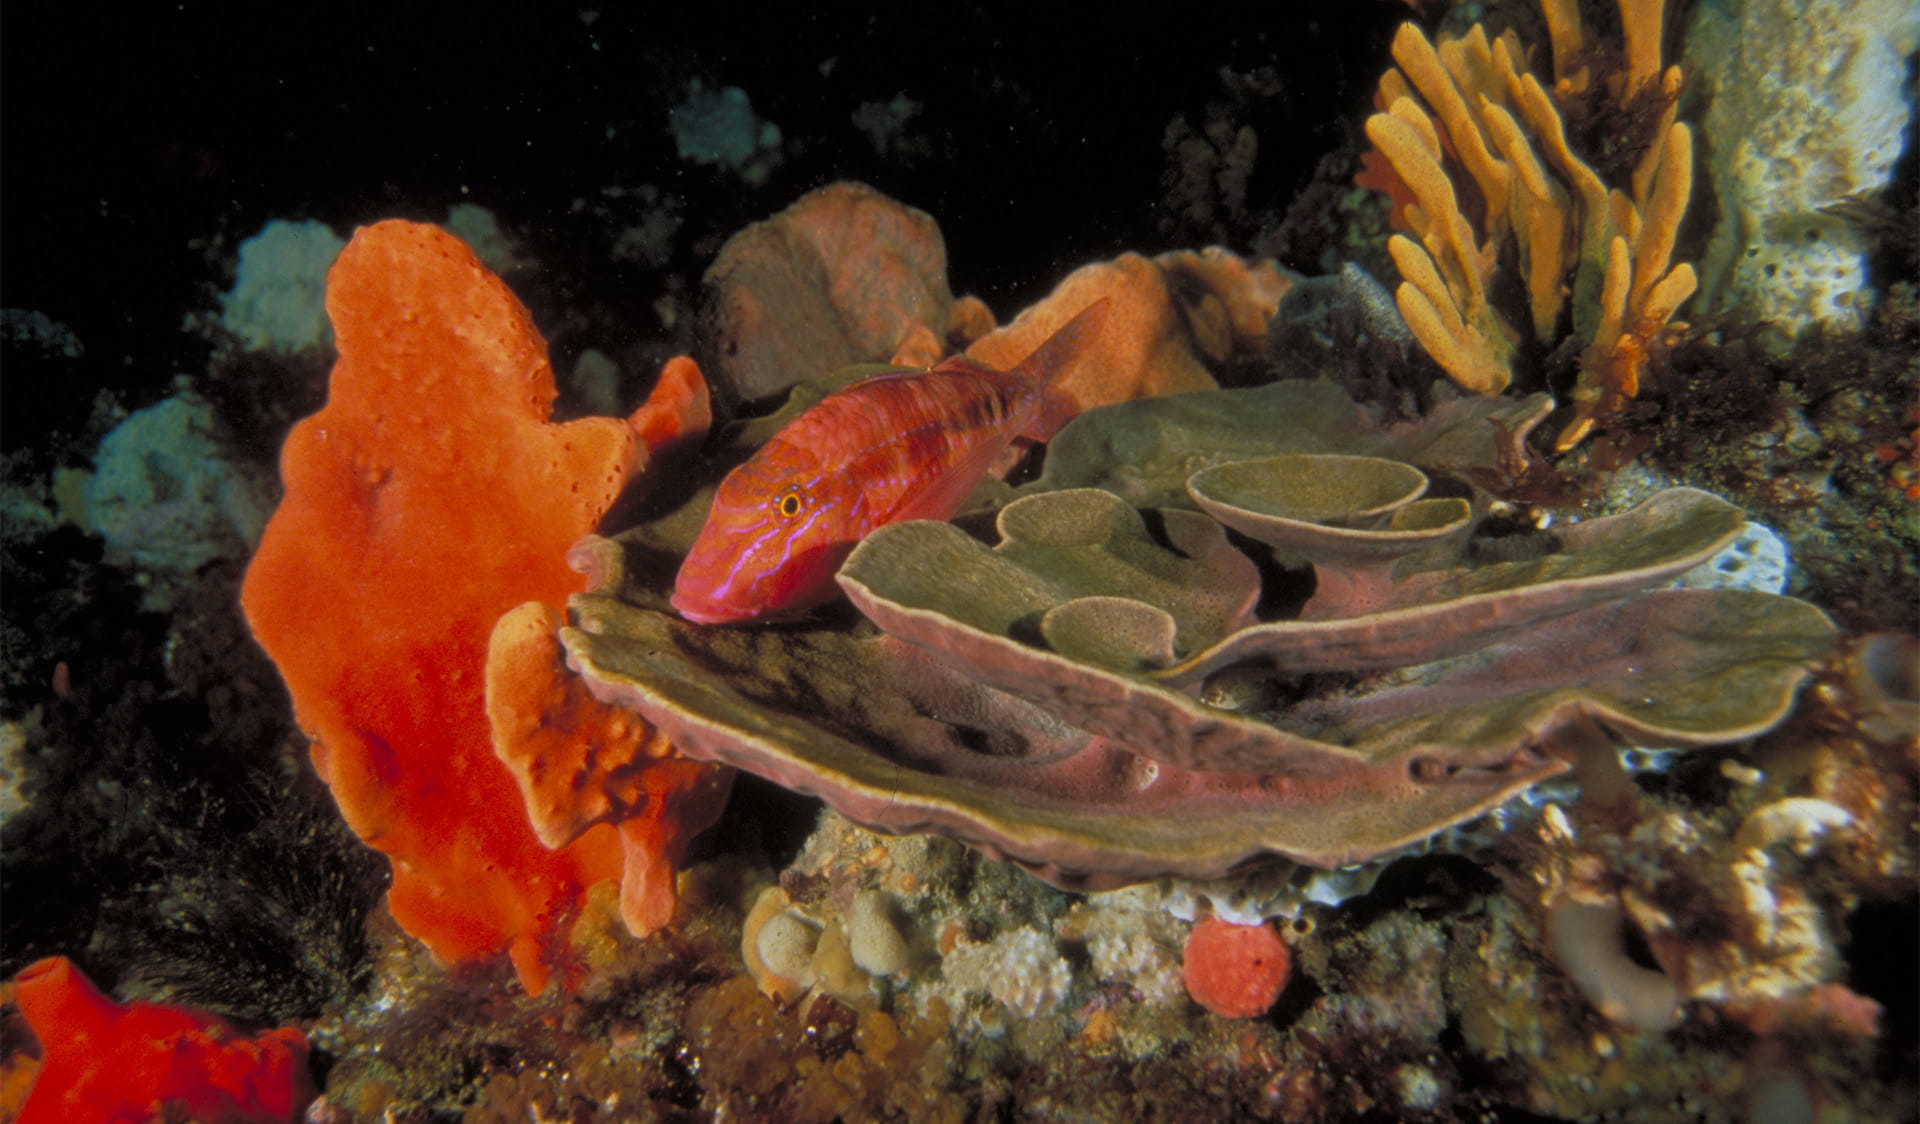 Underwater view of a Butterfly Perch swimming with sponges and coral